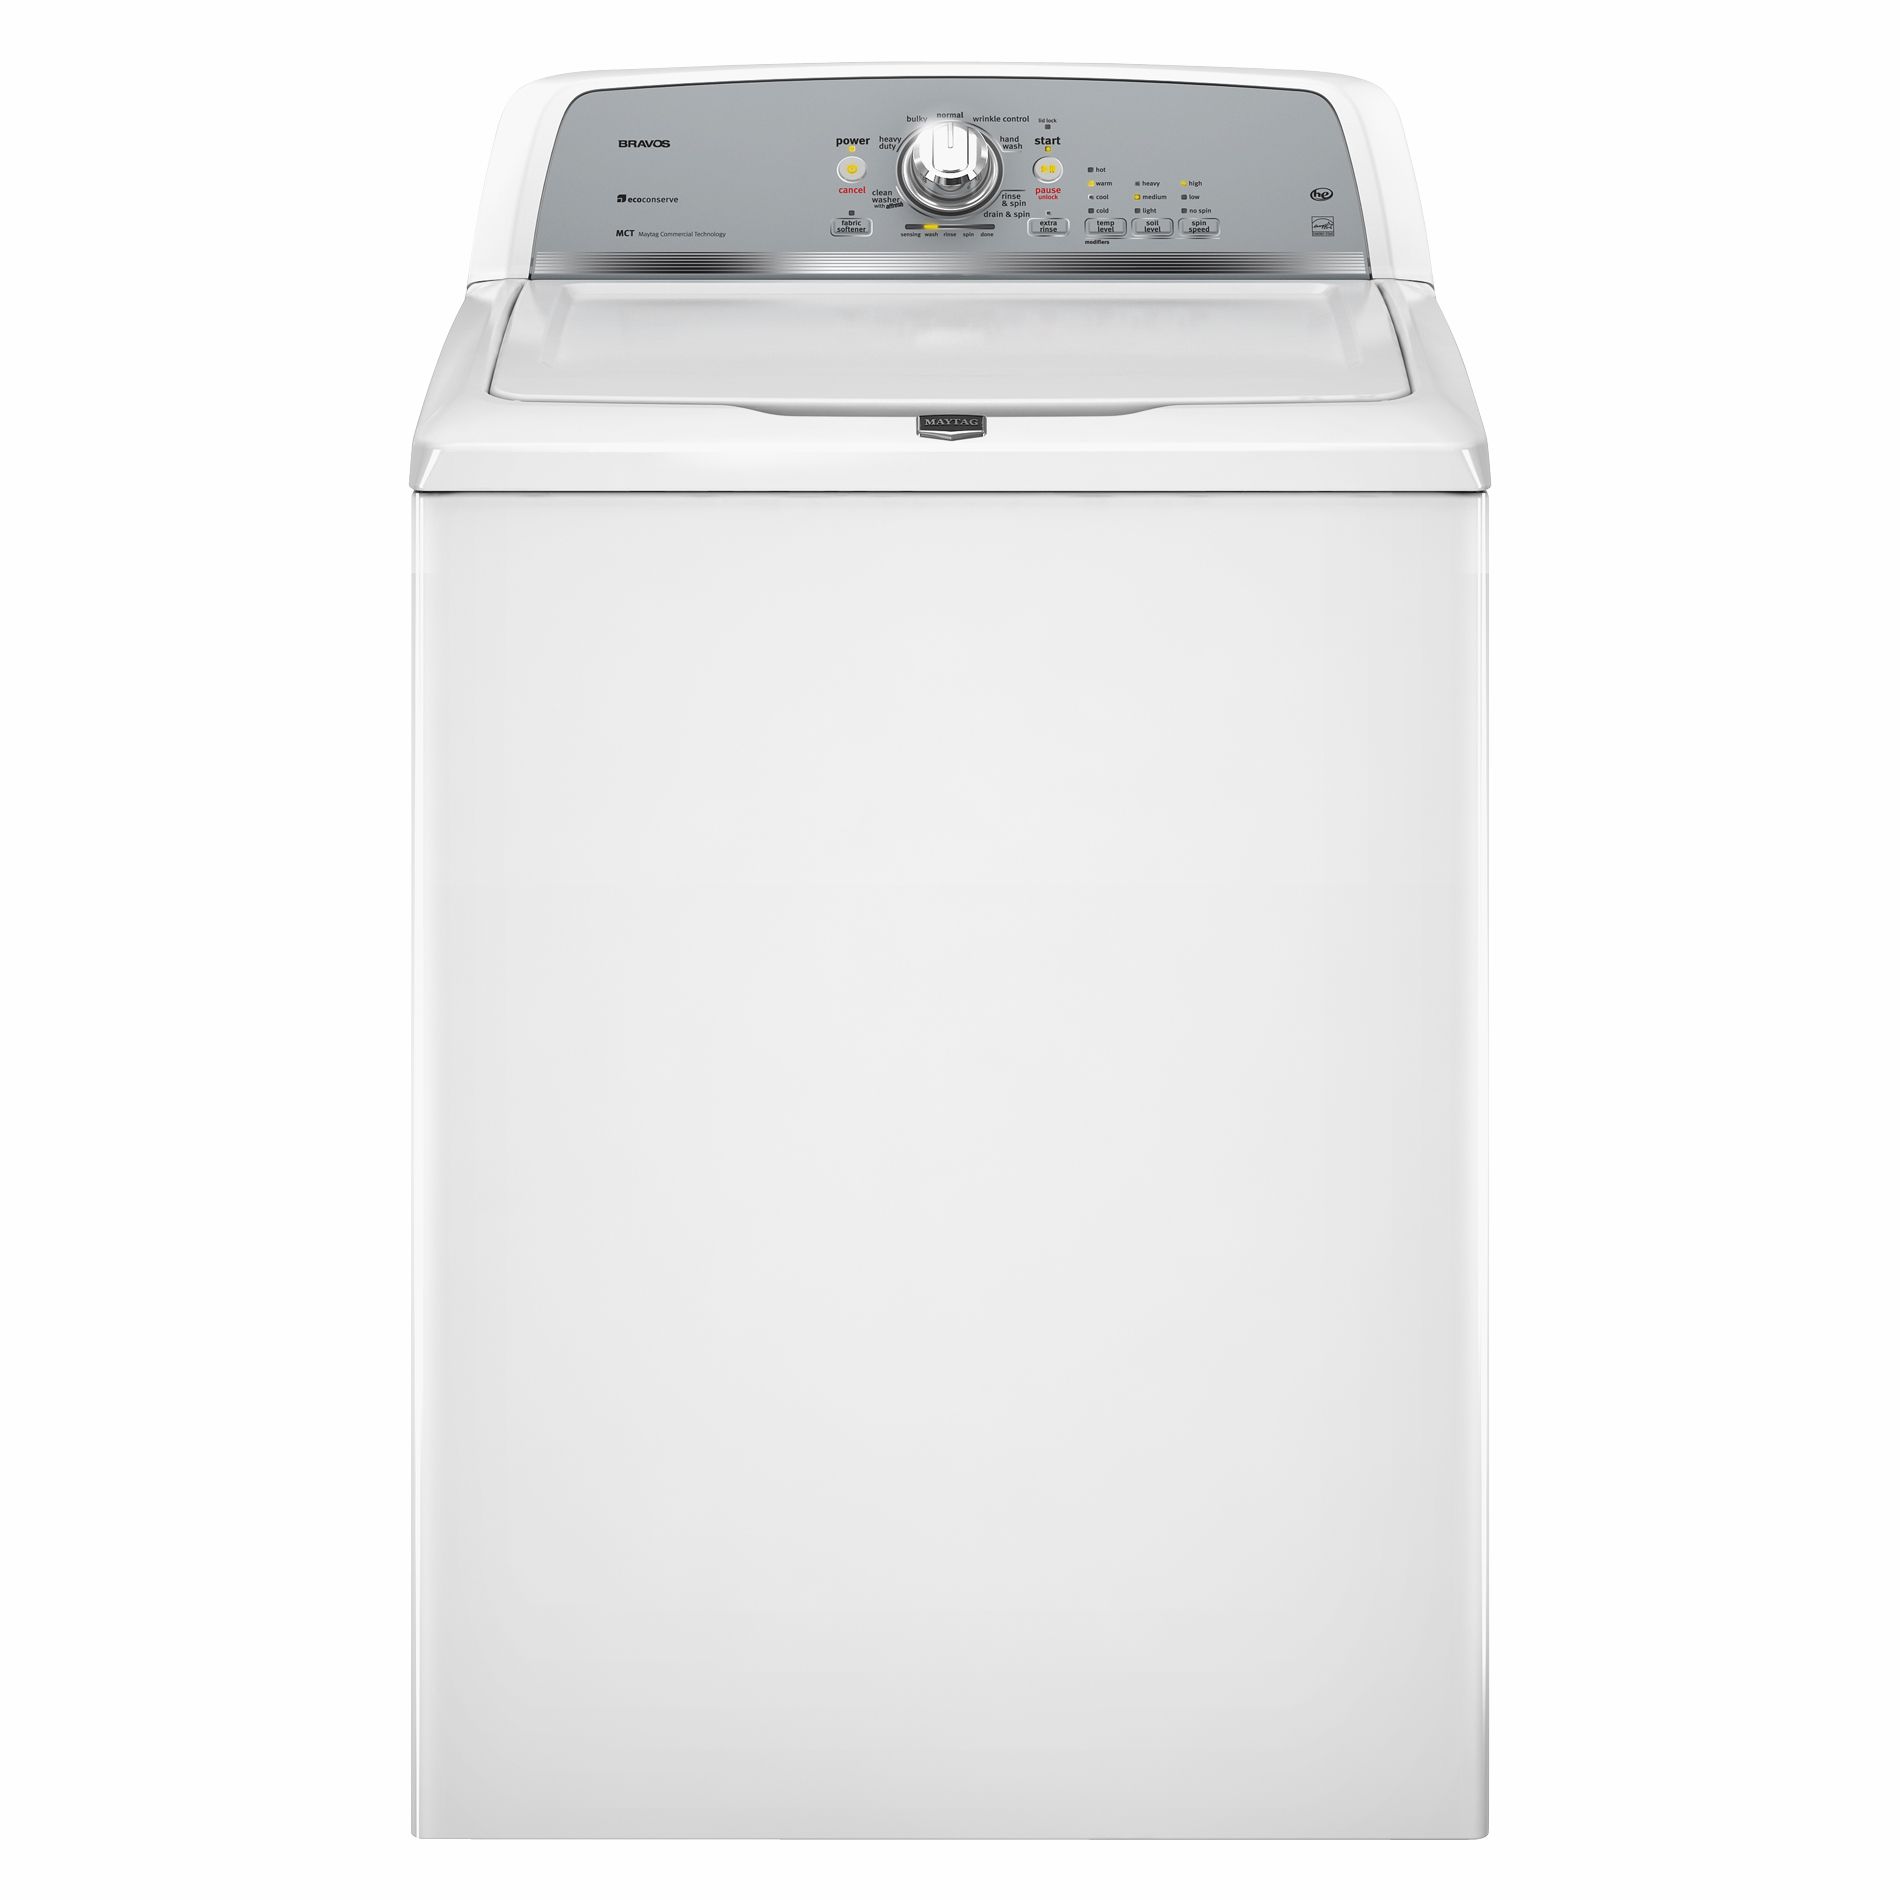 Maytag Bravos X 3.6 cu. ft. High-Efficiency Top-Load Washer w/ Low-Water Wash - White Less than 4 cu. ft.